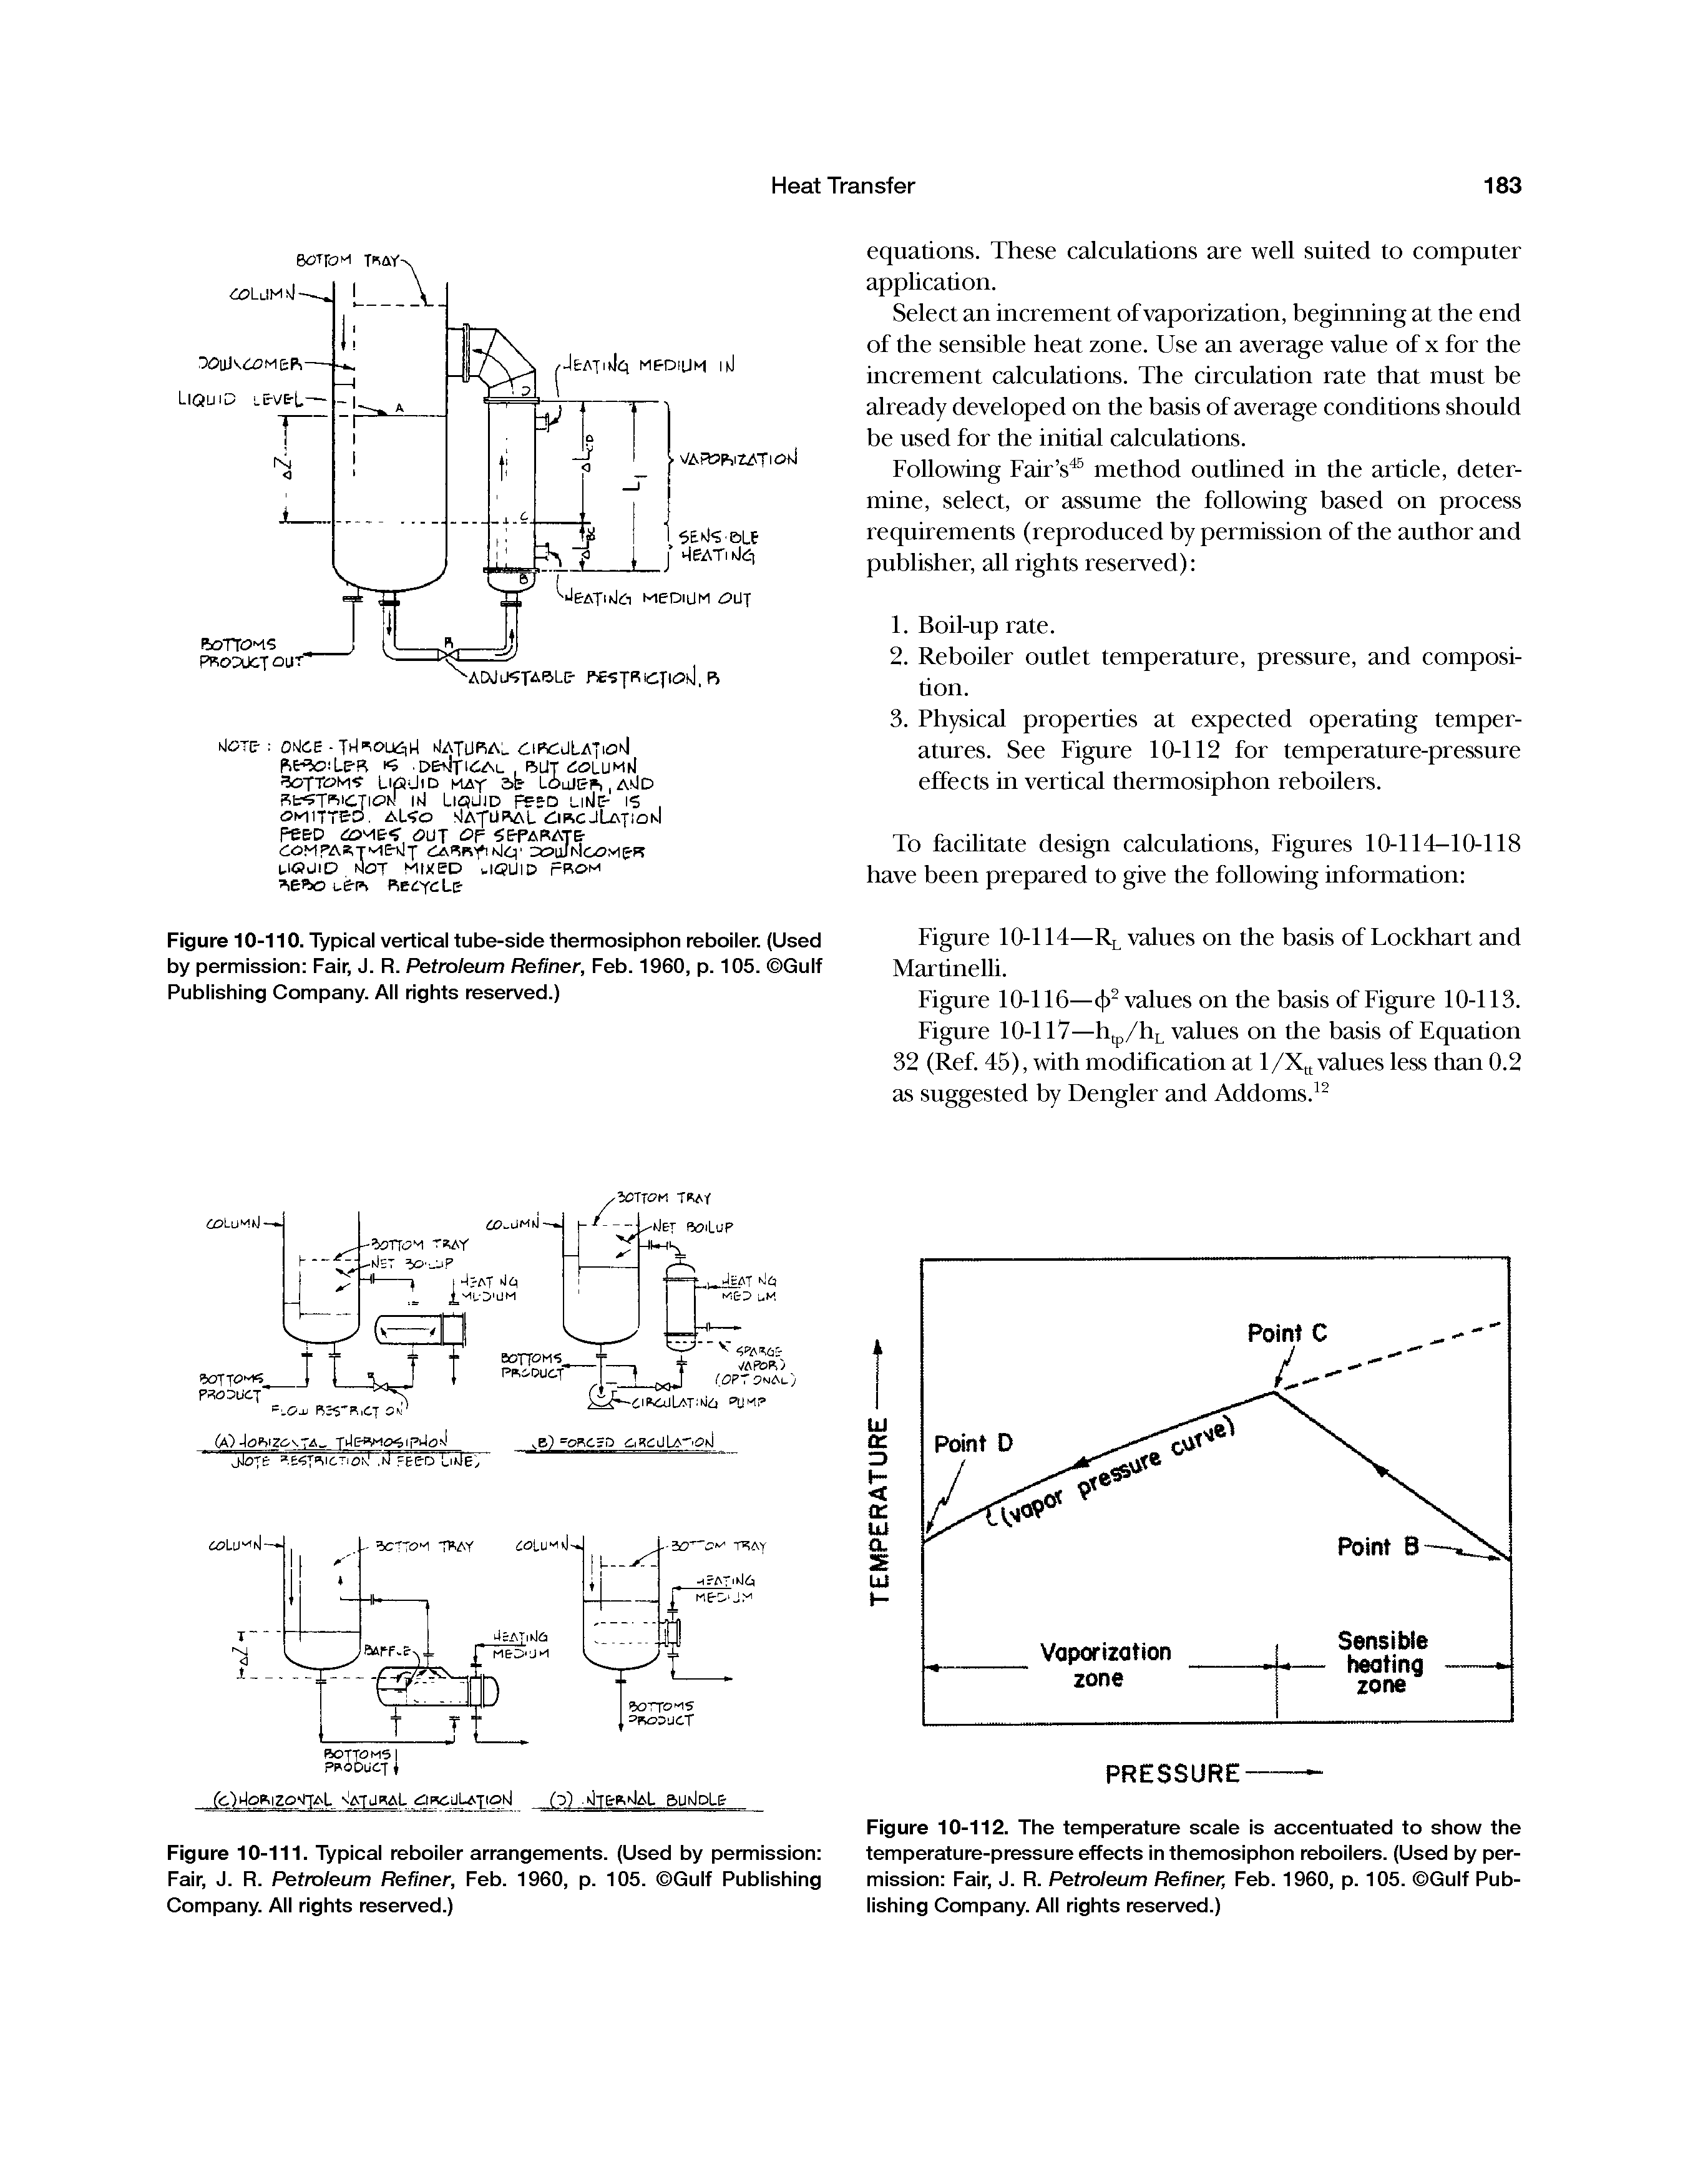 Figure 10-110. Typical vertical tube-side thermosiphon reboiler. (Used by permission Fair, J. R. Petroleum Refiner, Feb. 1960, p. 105. Gulf Publishing Company. All rights reserved.)...